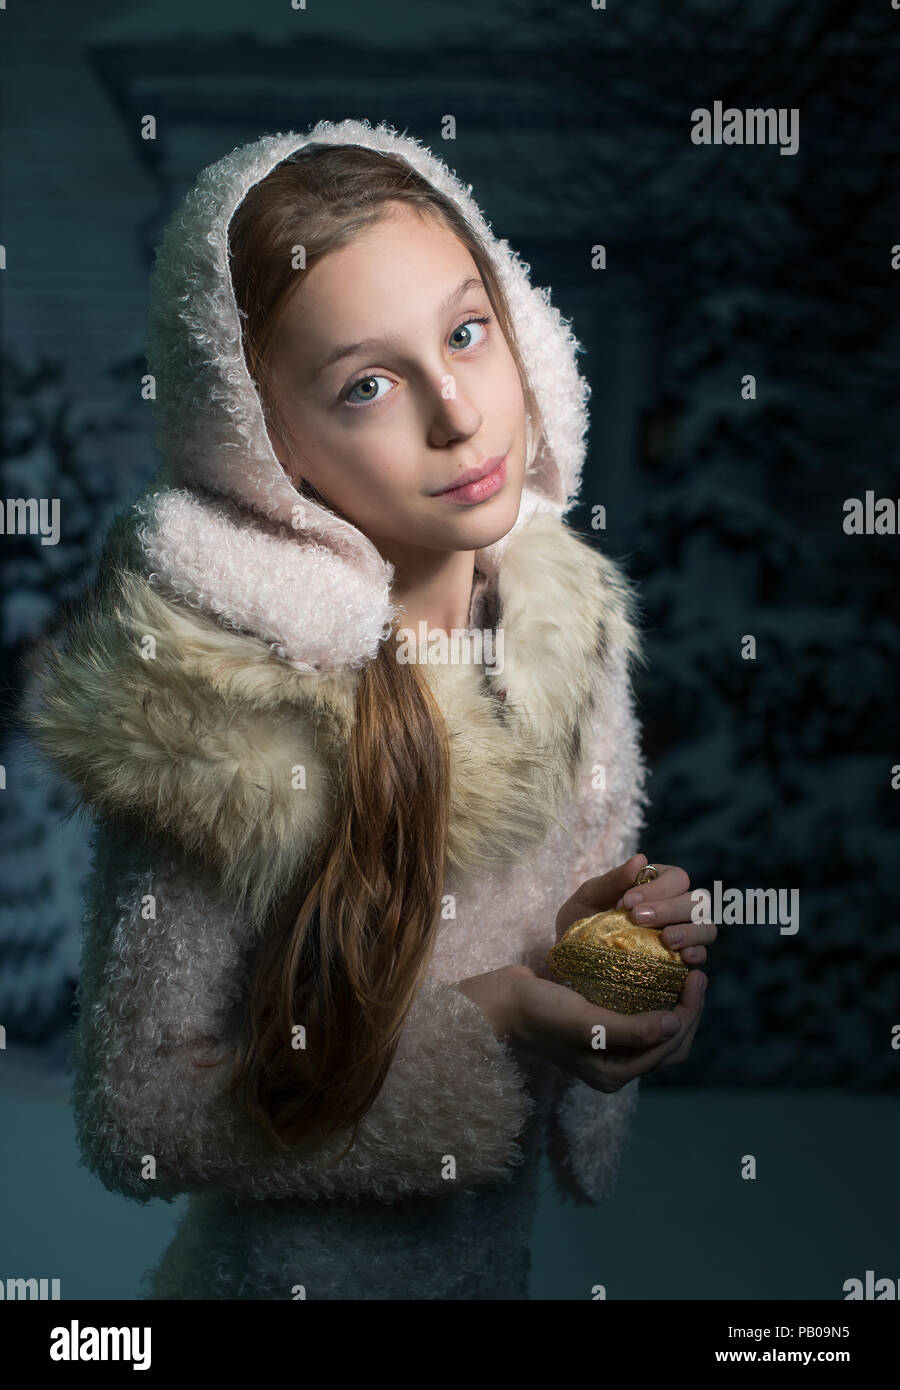 Portrait of a girl standing in the snow holding a golden bauble Stock Photo